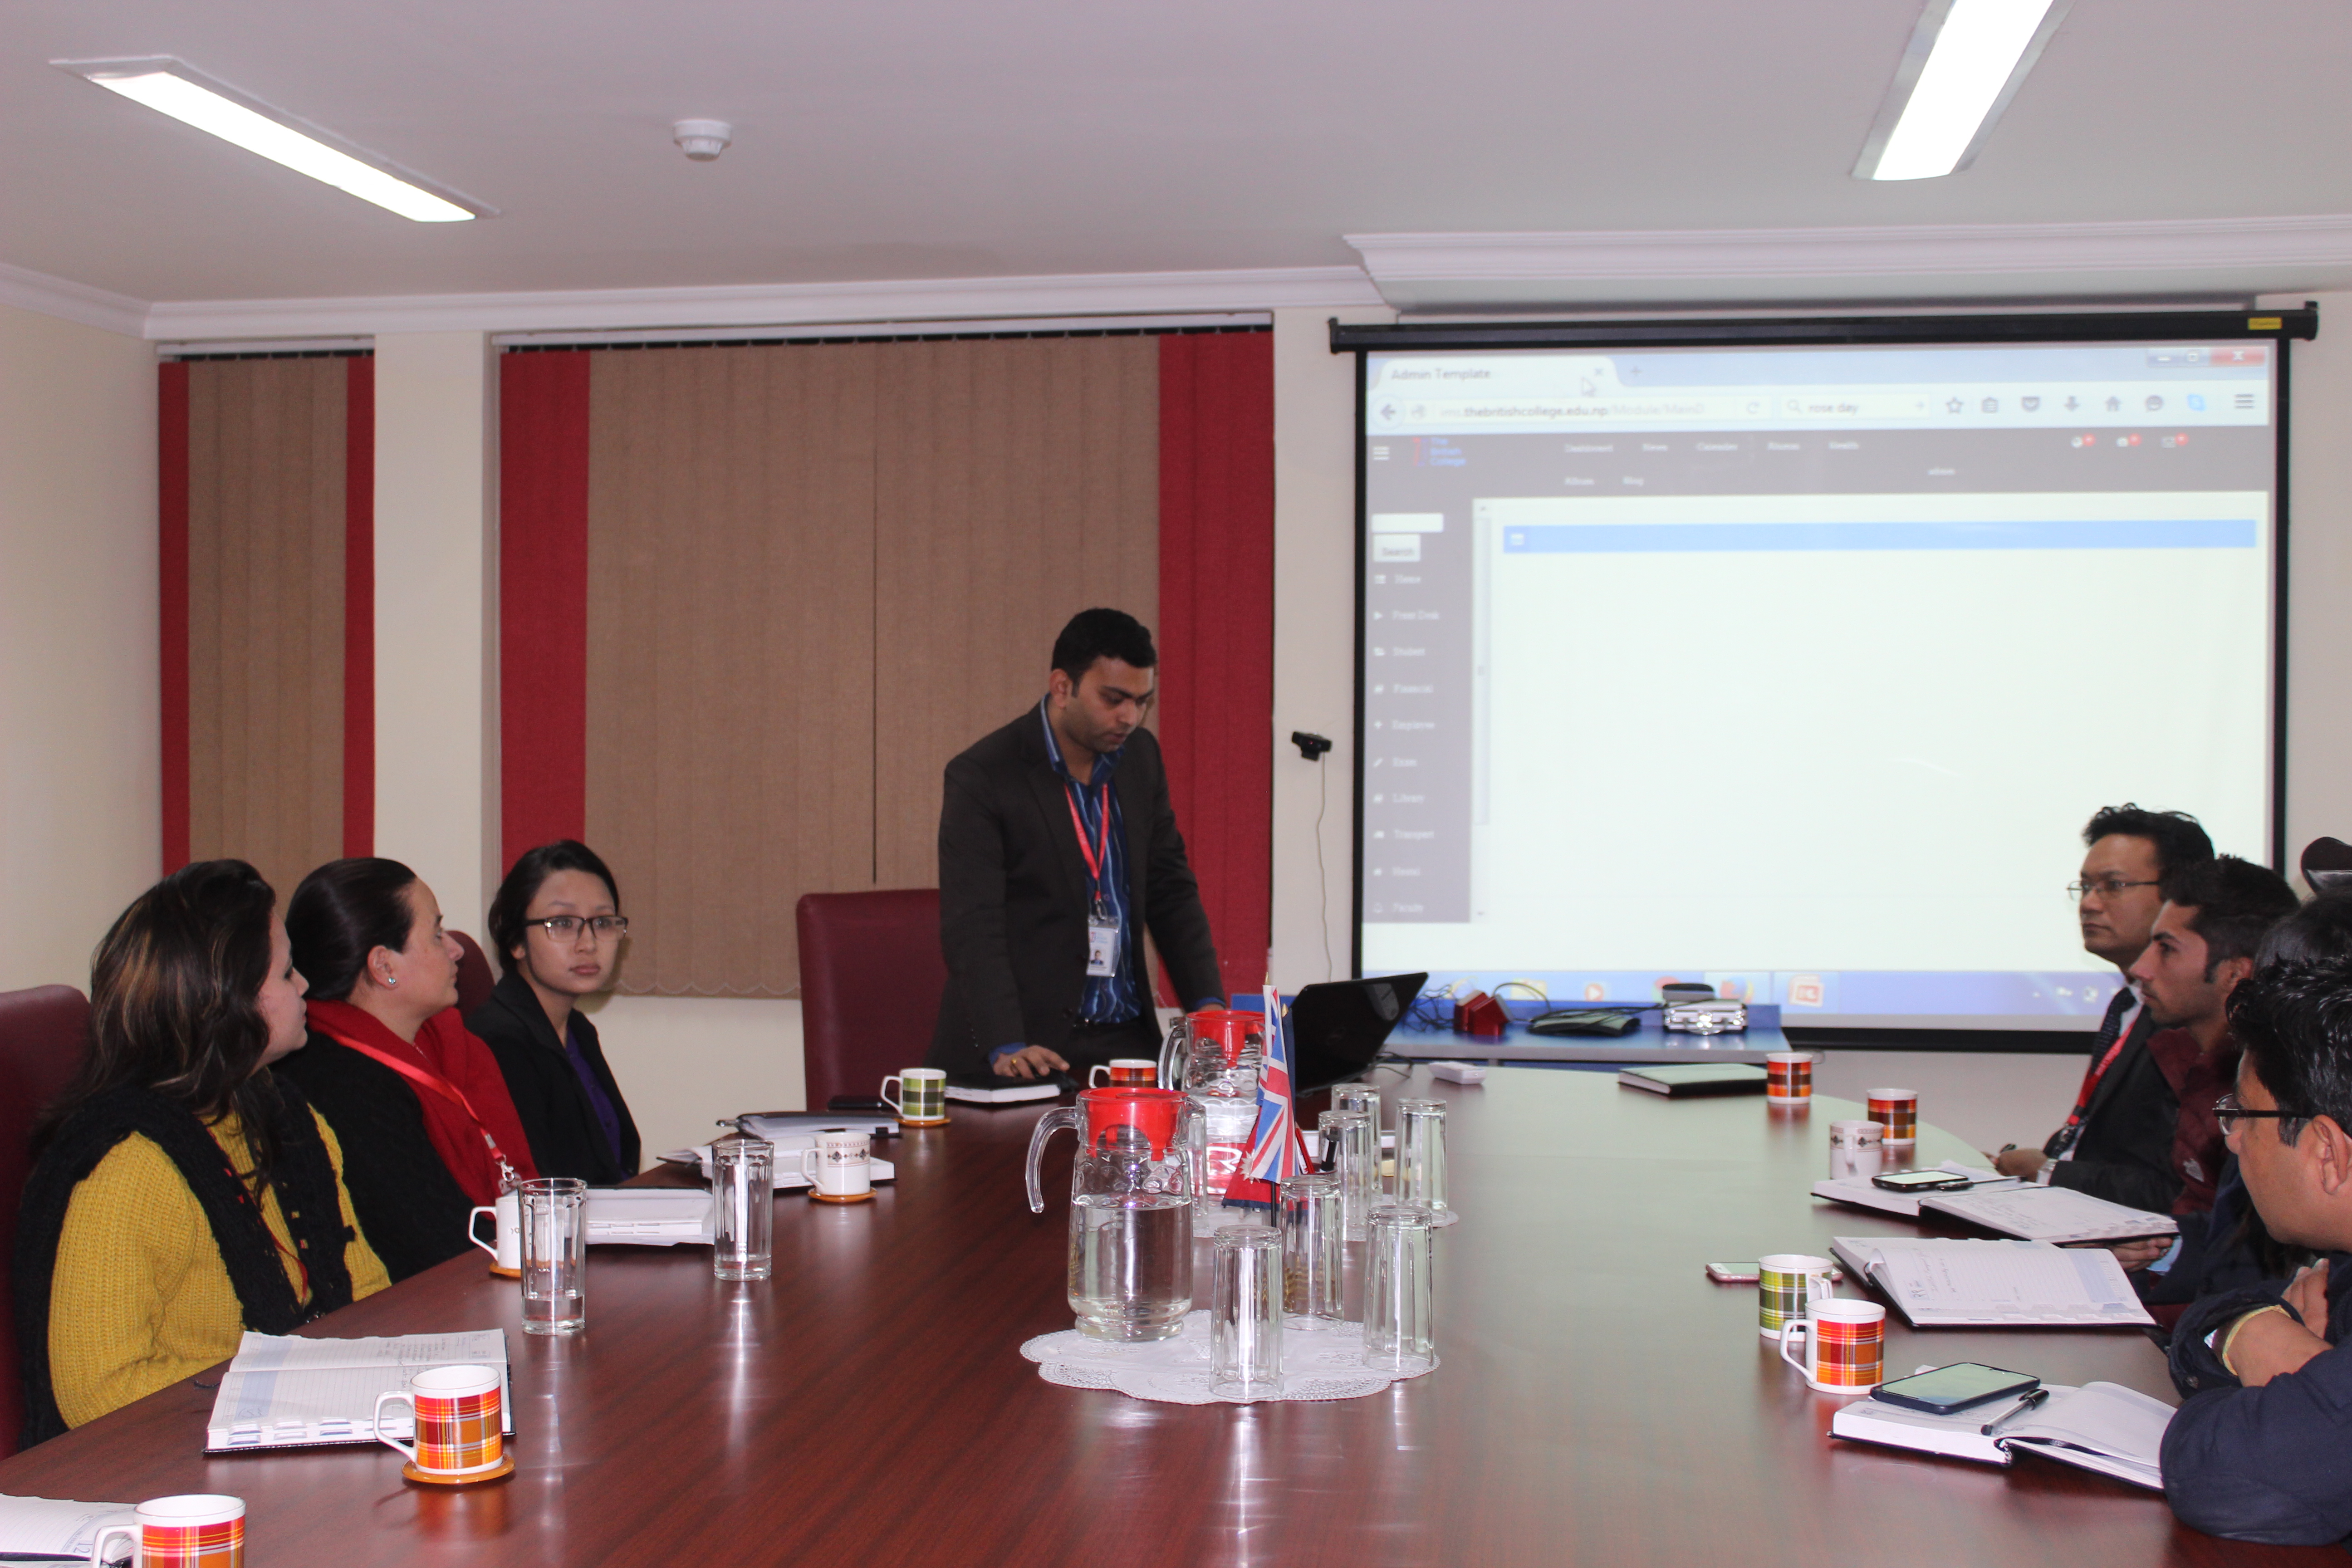 Introducing myTBC ( Institutional Management System) to our staff